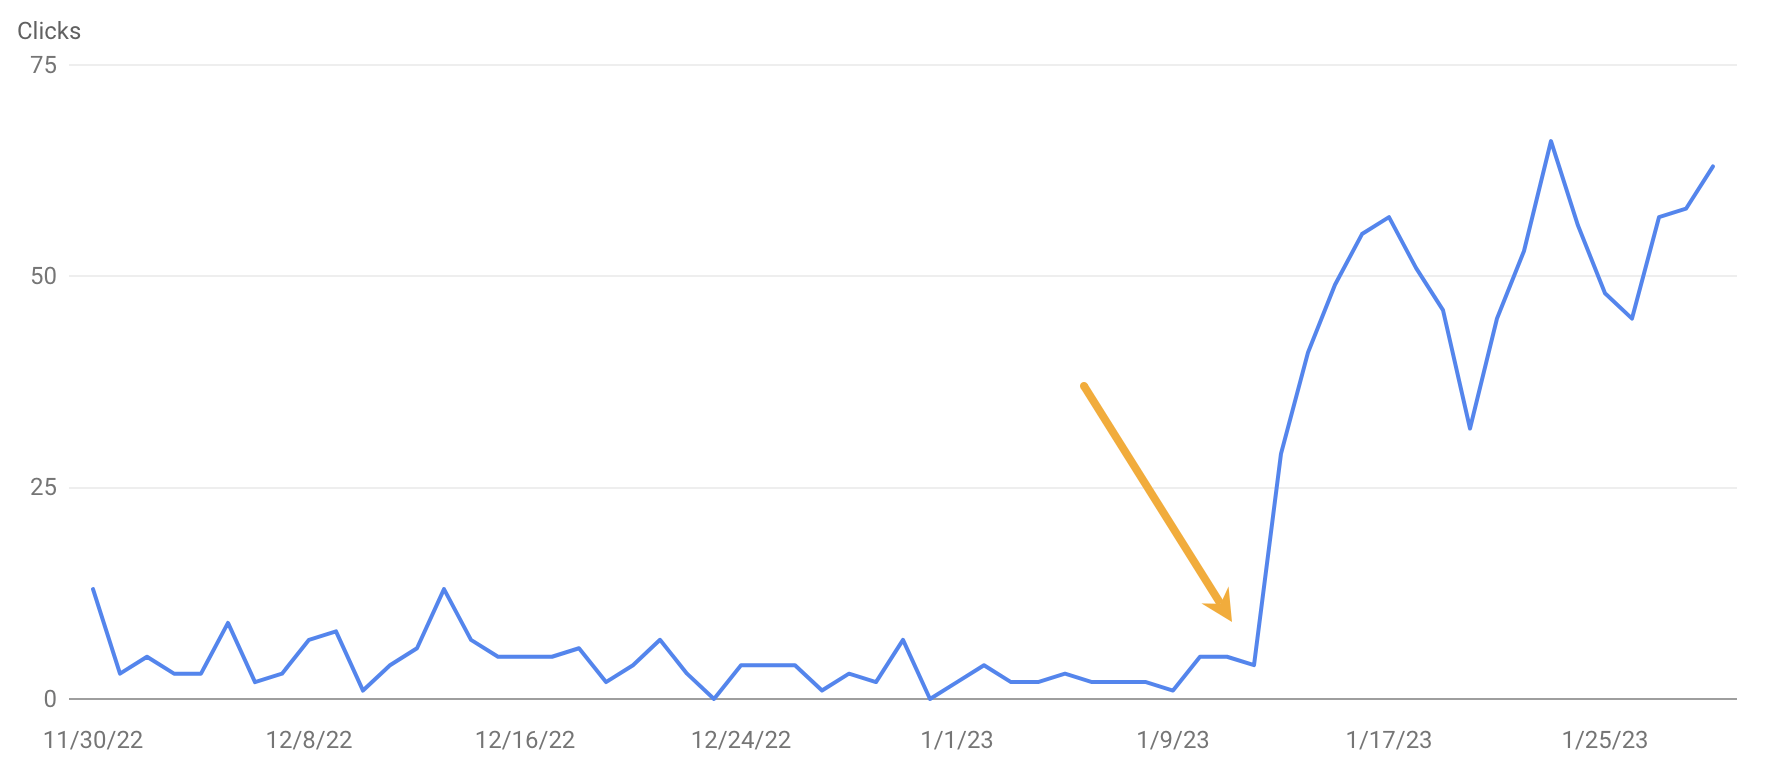 Results of our content refresh
